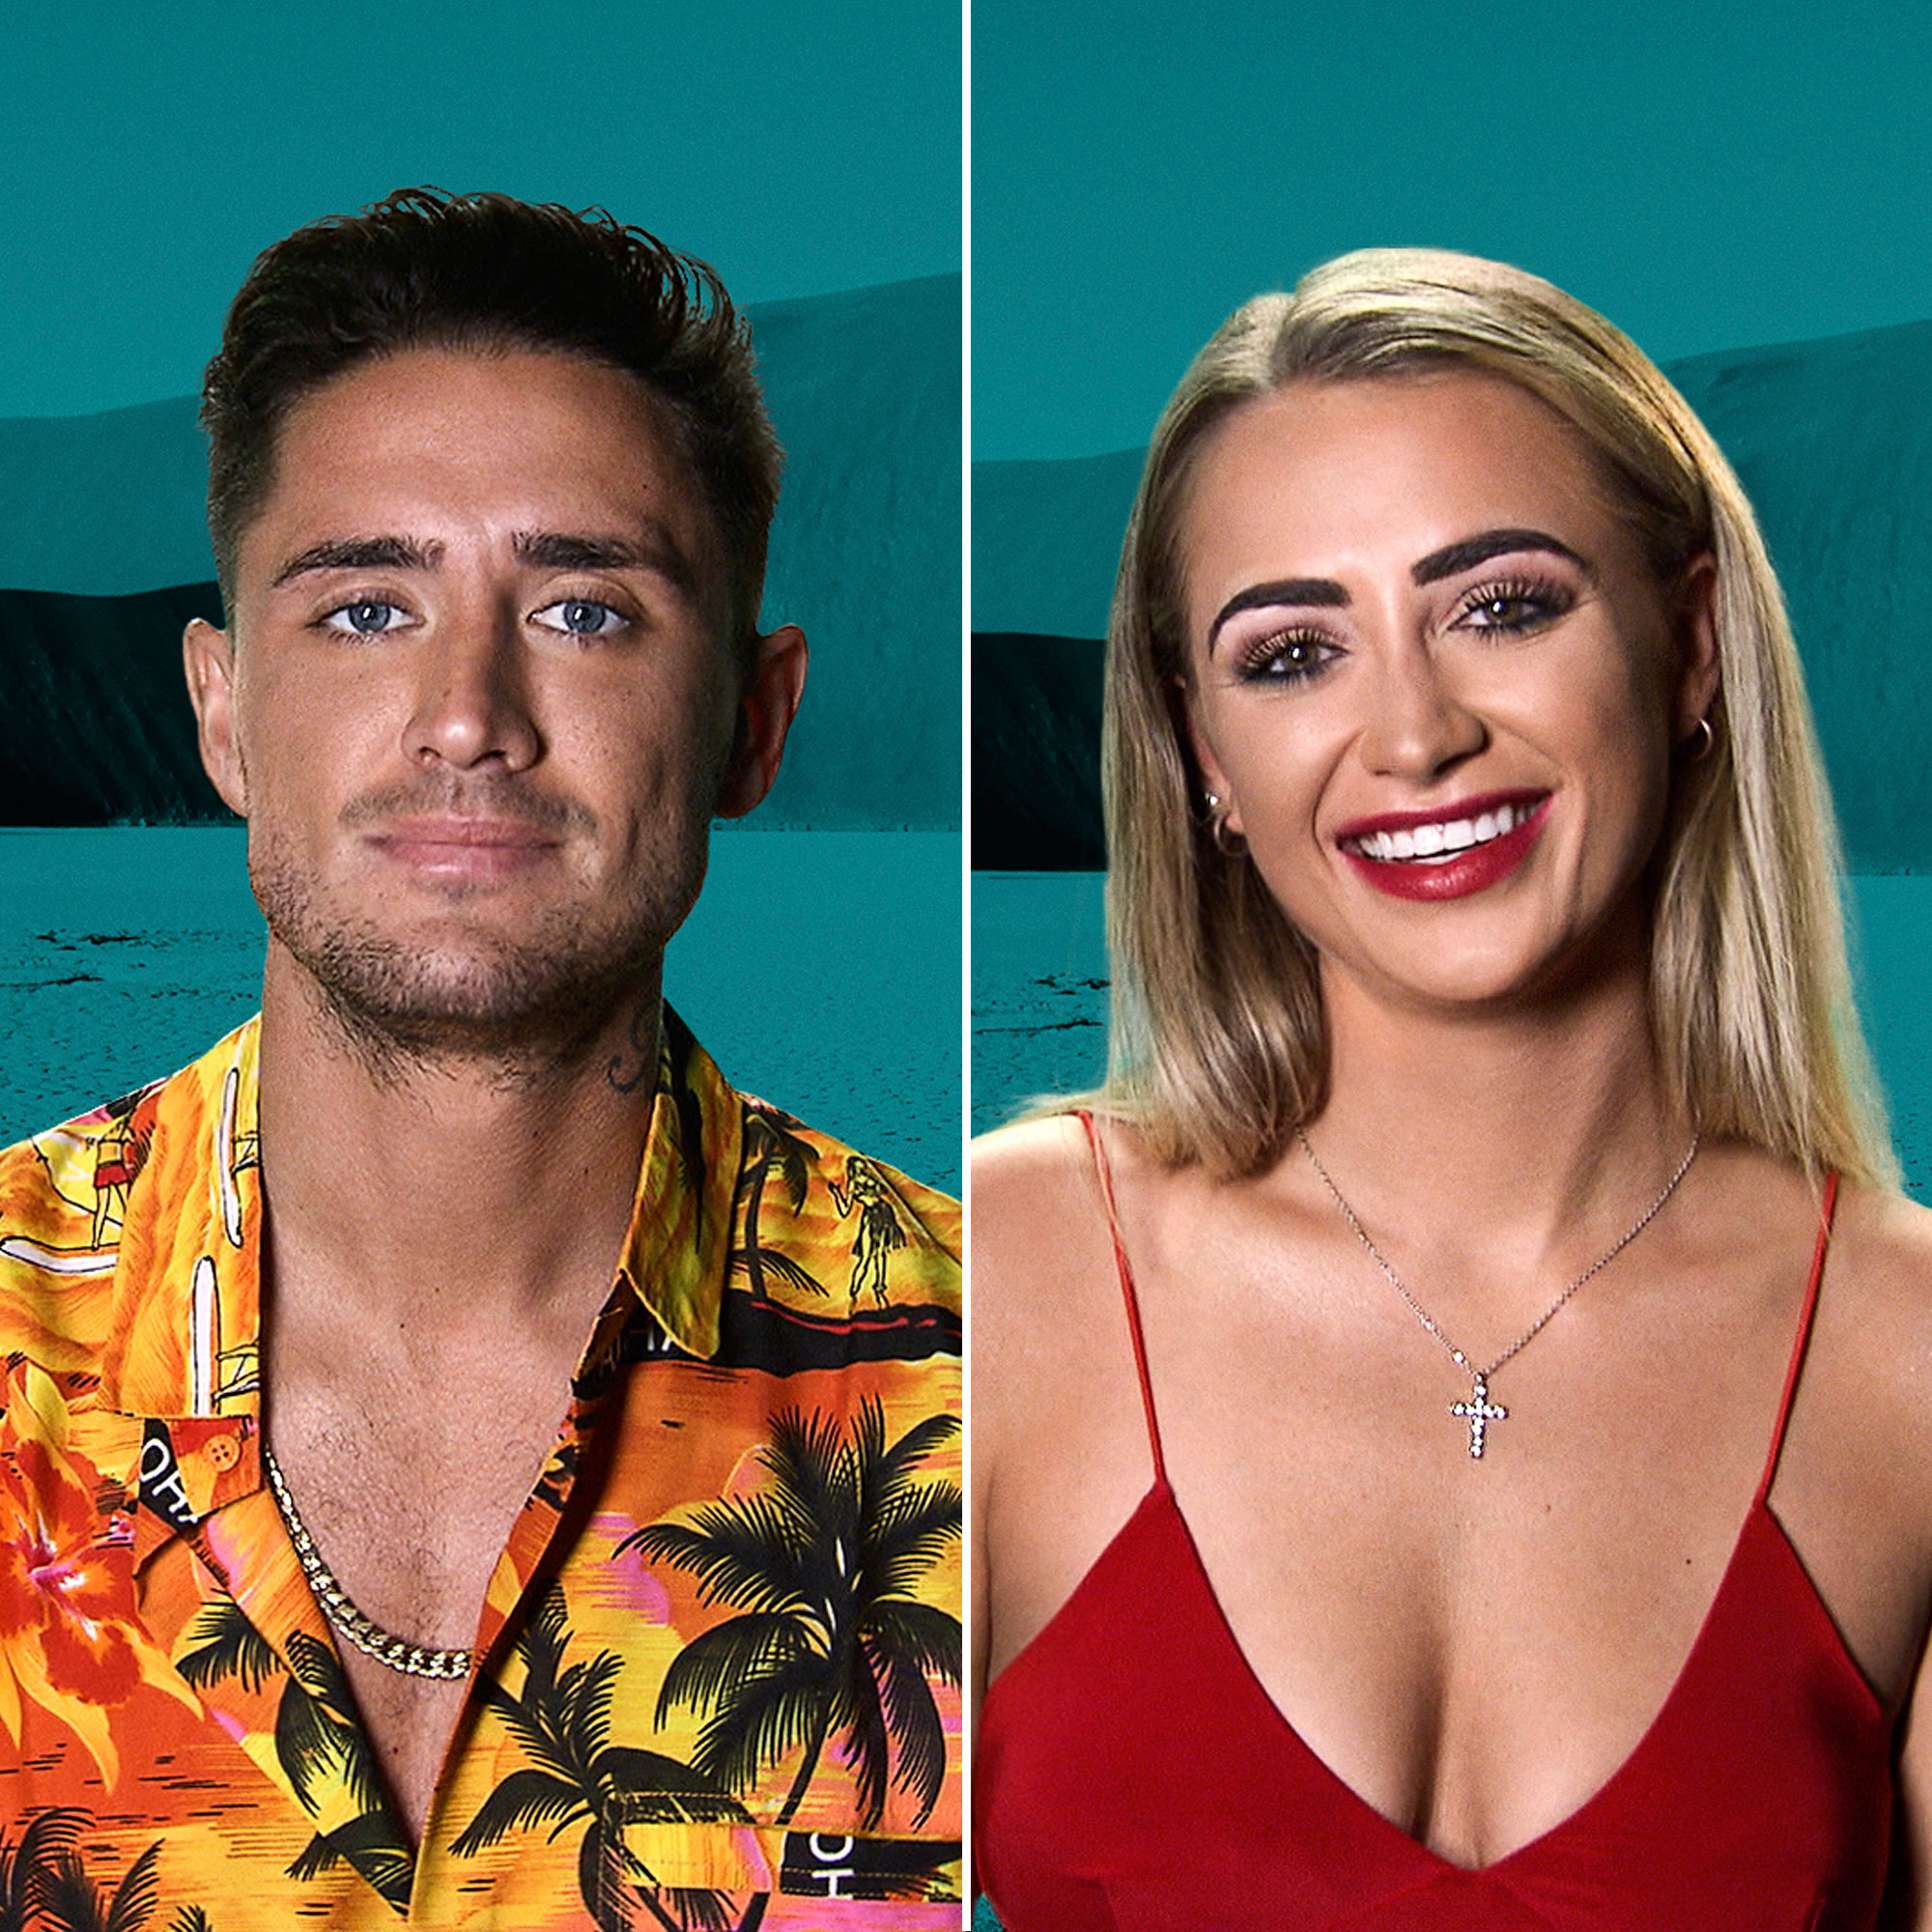 The Challenges Stephen Bear Arrested After Georgia Harrison Claims photo picture